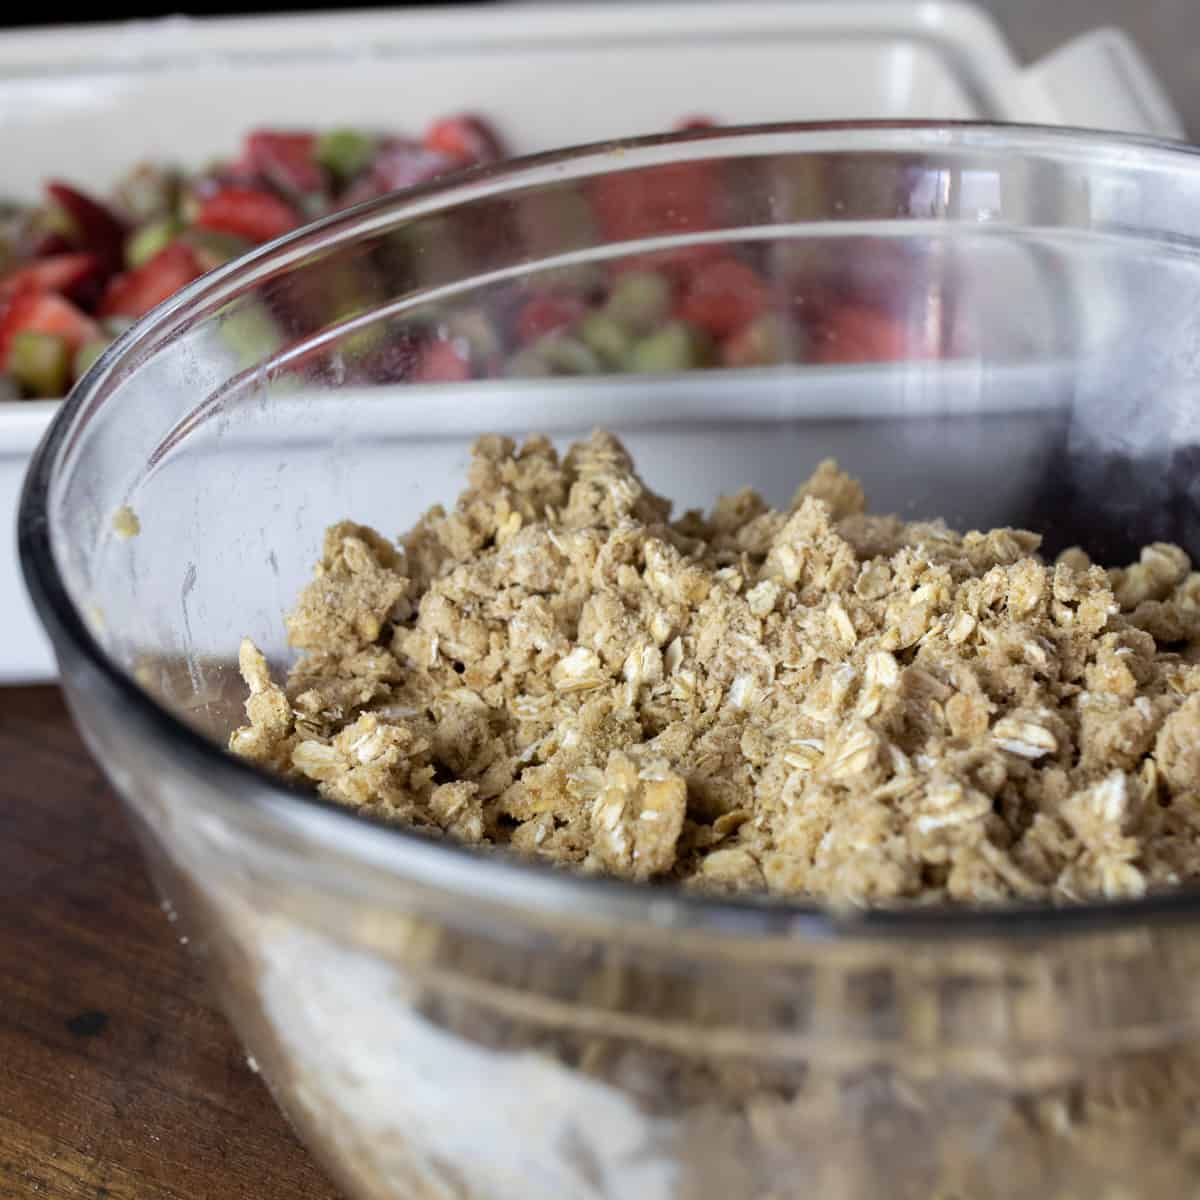 Crumble topping mixed in a large glass baking dish.